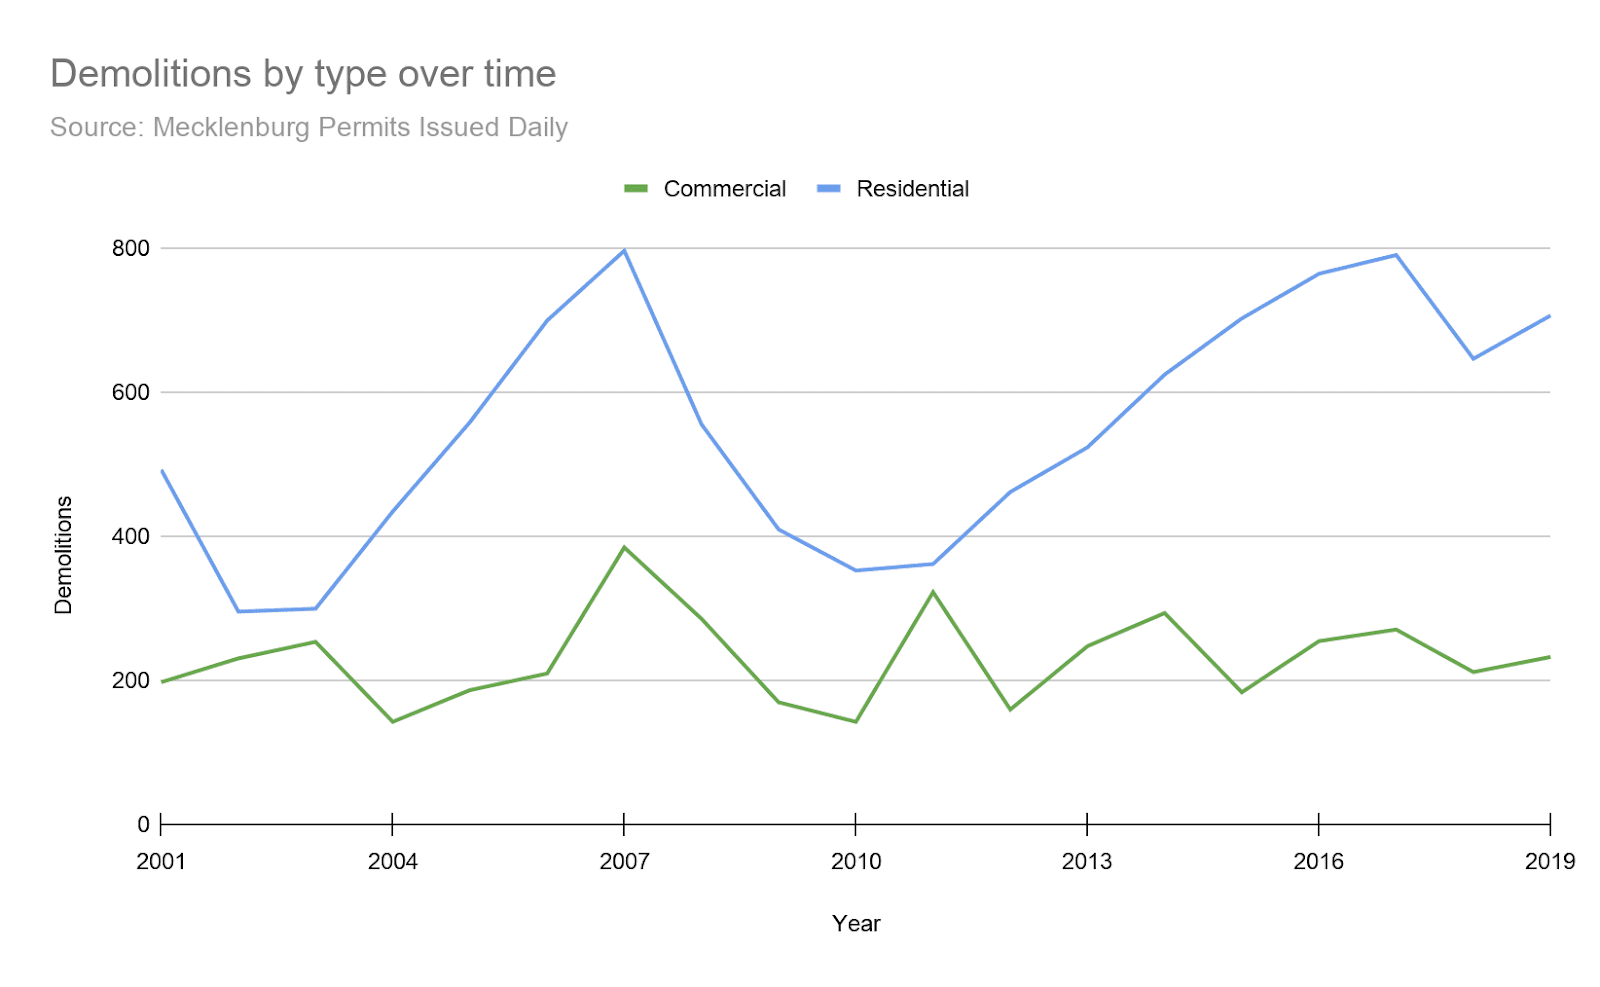 A graph of the demolitions by type over time from 2001 to 2019.